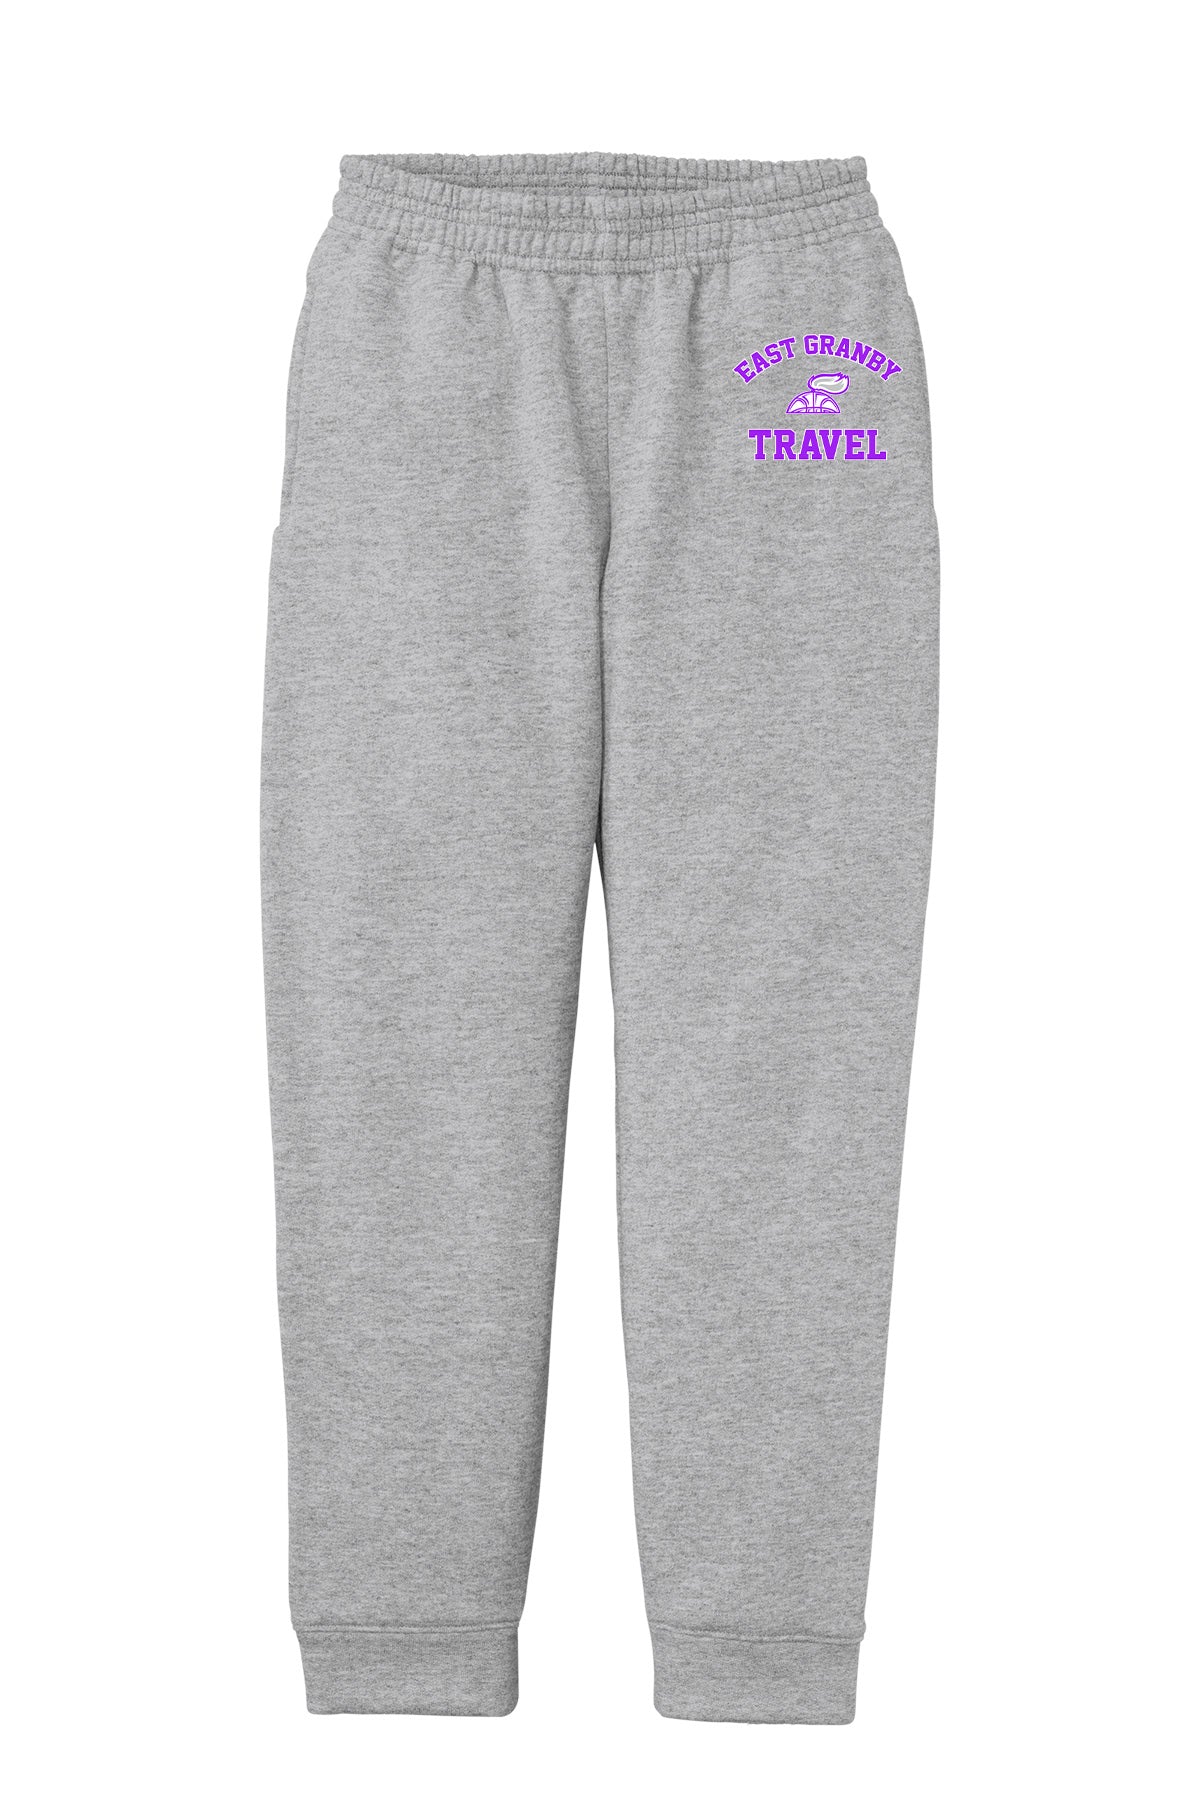 EG Travel Youth Joggers "Classic" - PC78YJ (color options available)